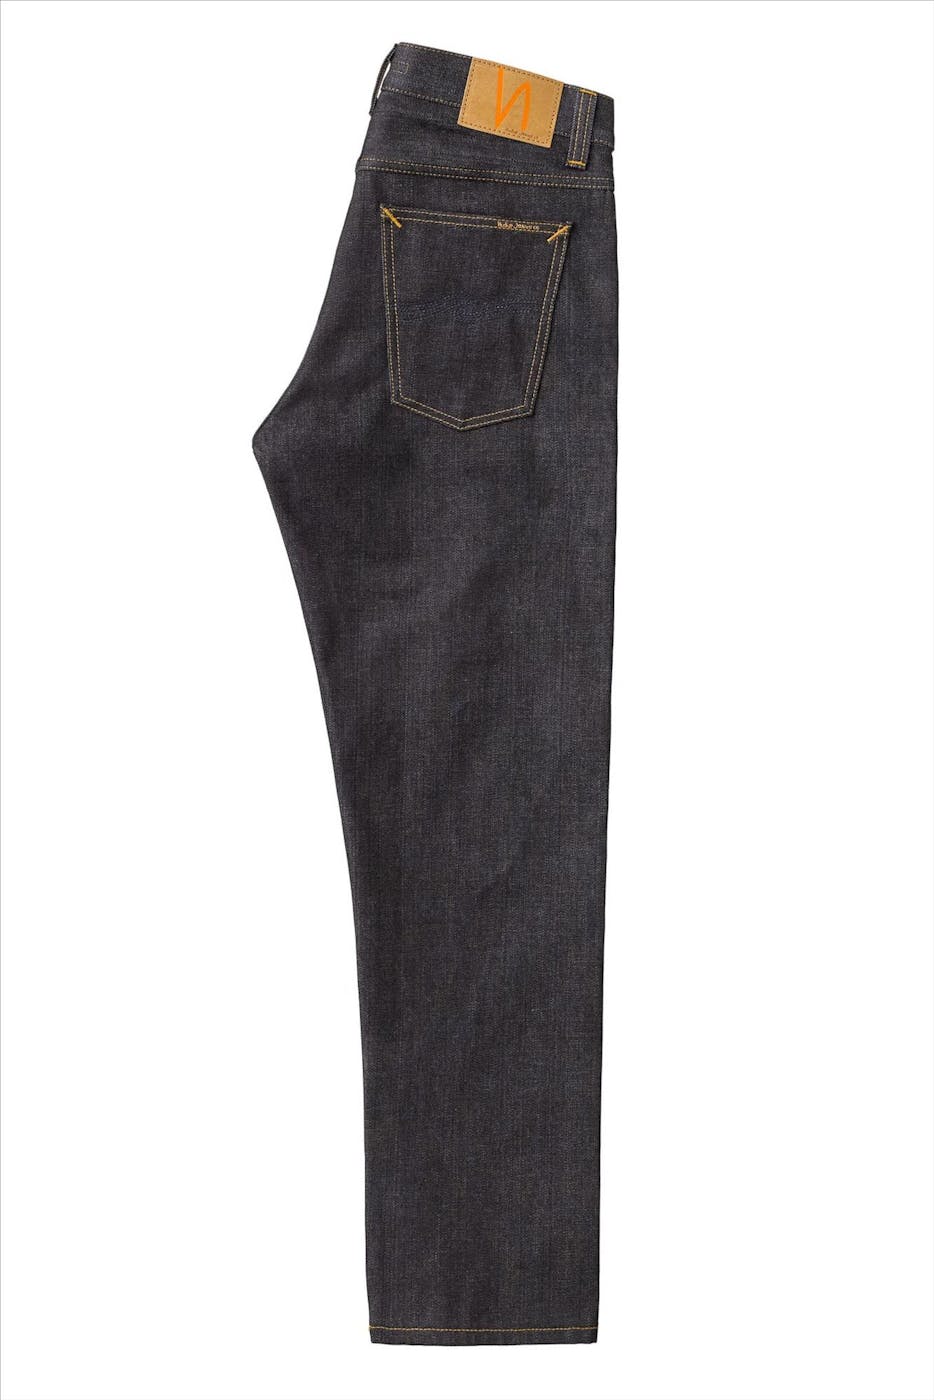 Nudie Jeans Co. - Indigoblauwe Gritty Jackson straight jeans